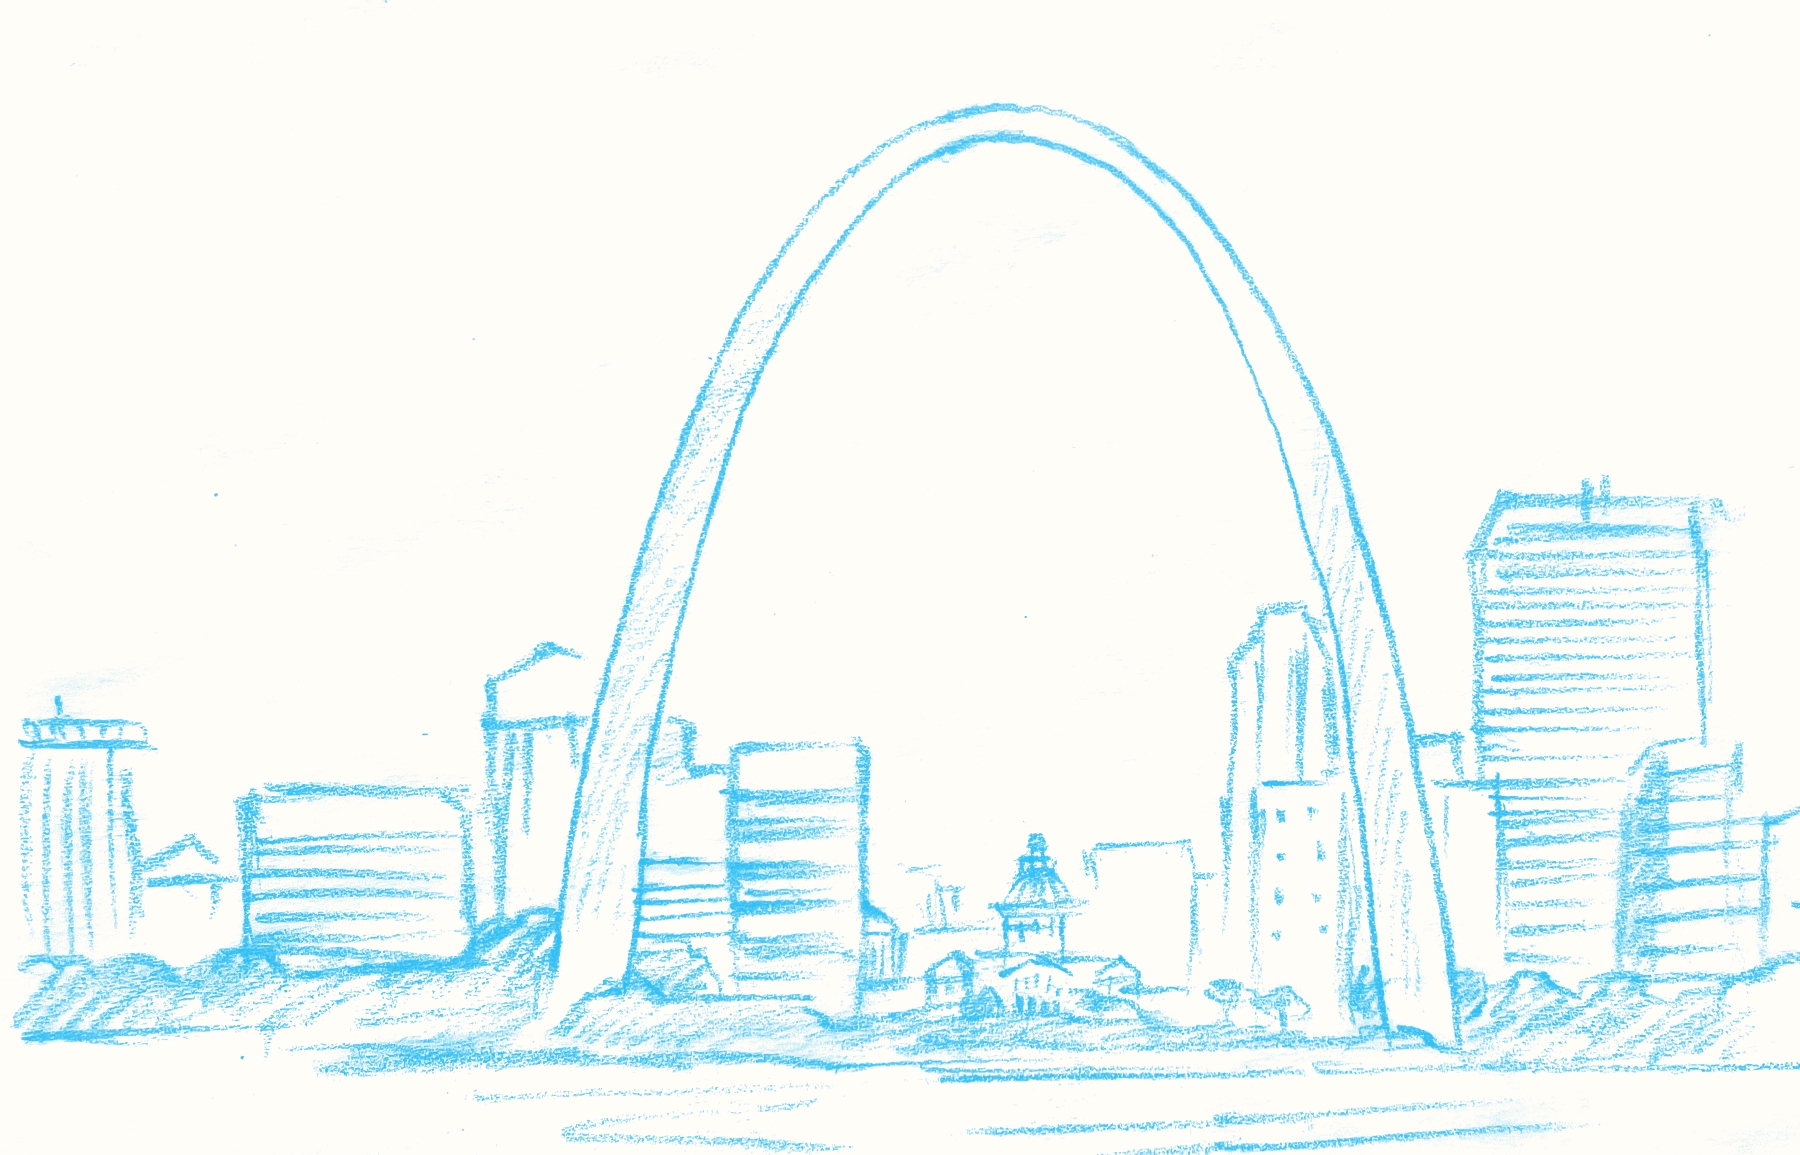 Illustration of The Gateway Arch in St. Loius.